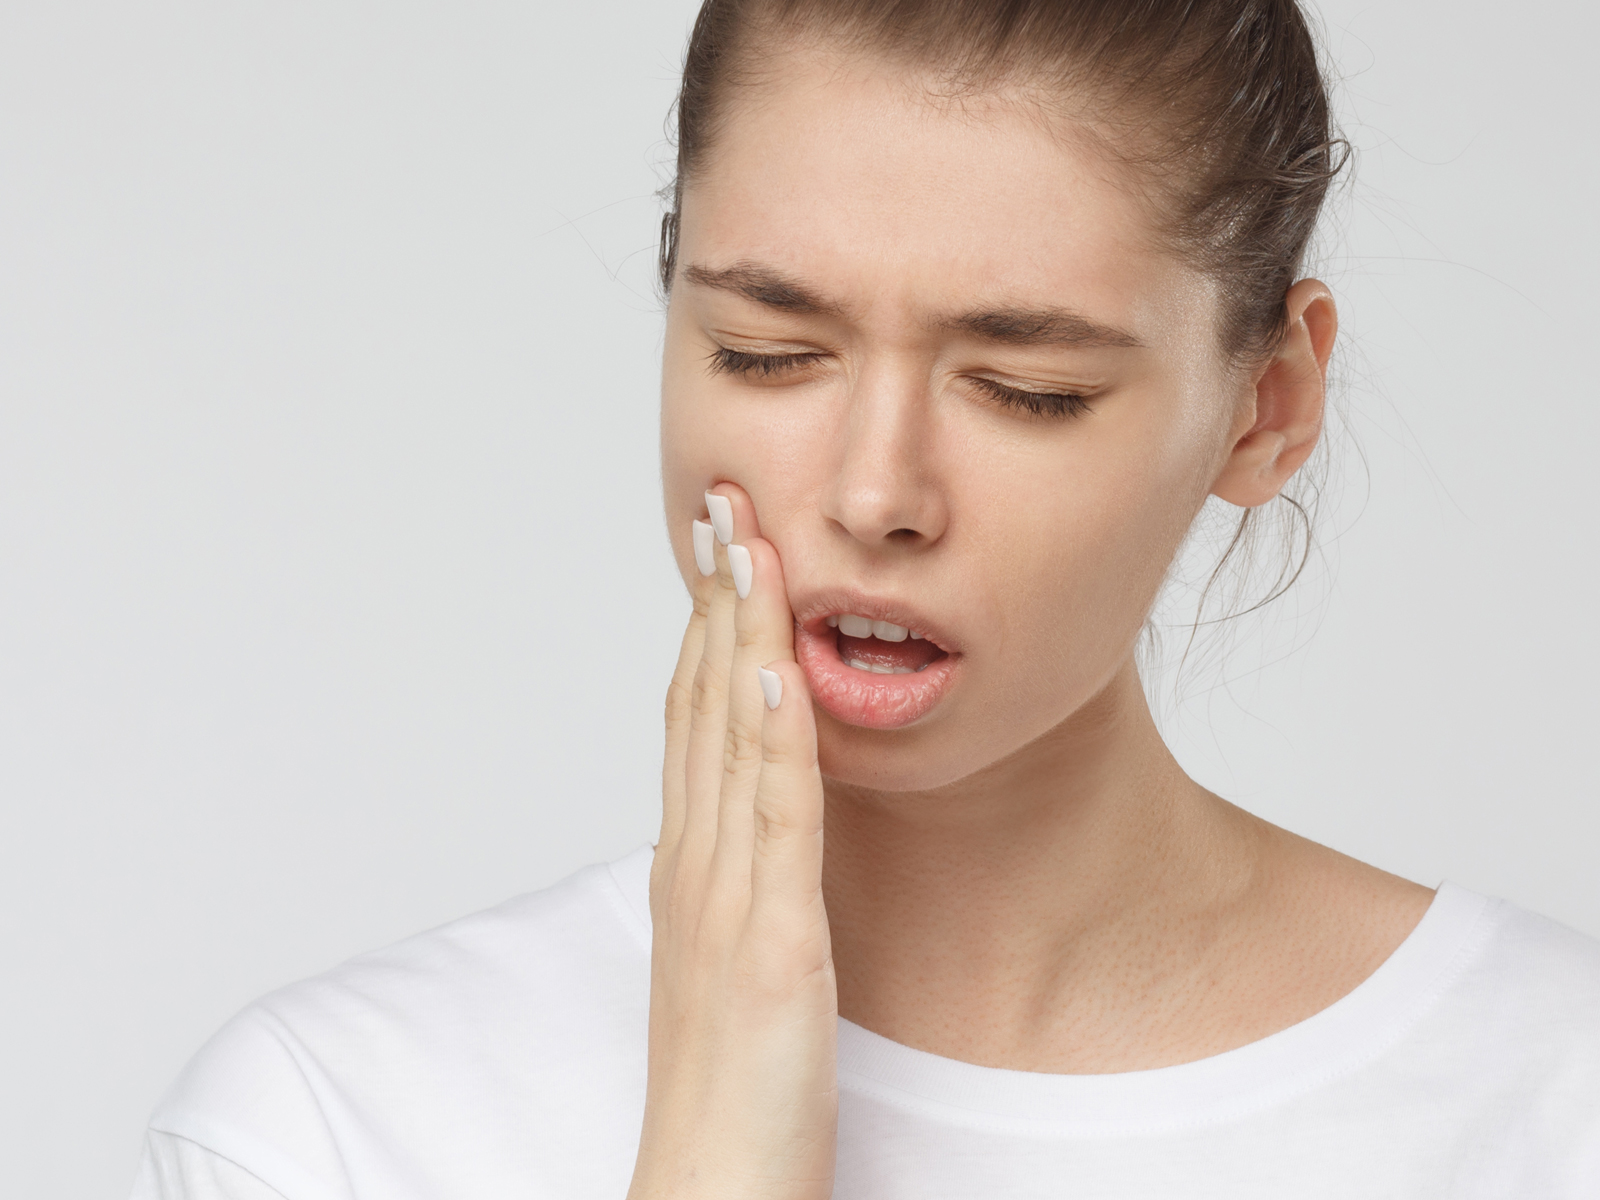 Can A Person Get Rid Of Cavities At Home?